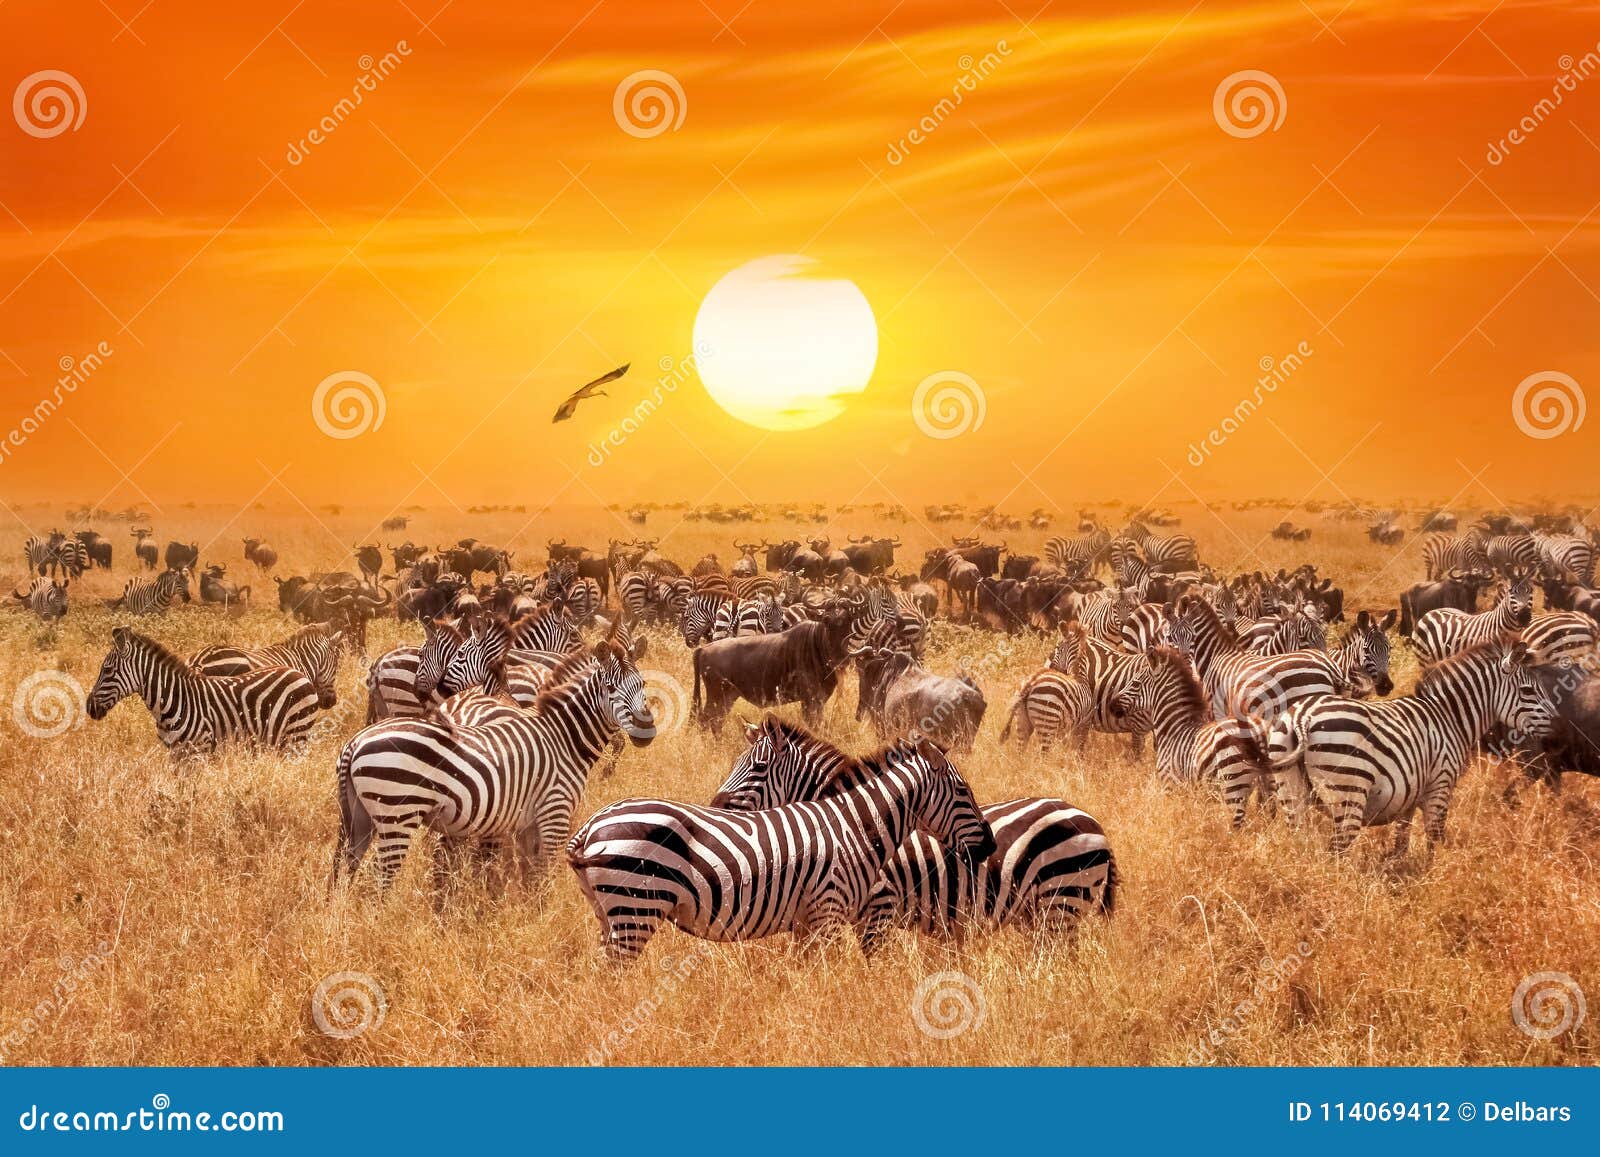 groupe of wild zebras and antelopes in the african savanna against a beautiful orange sunset. wild nature of tanzania.